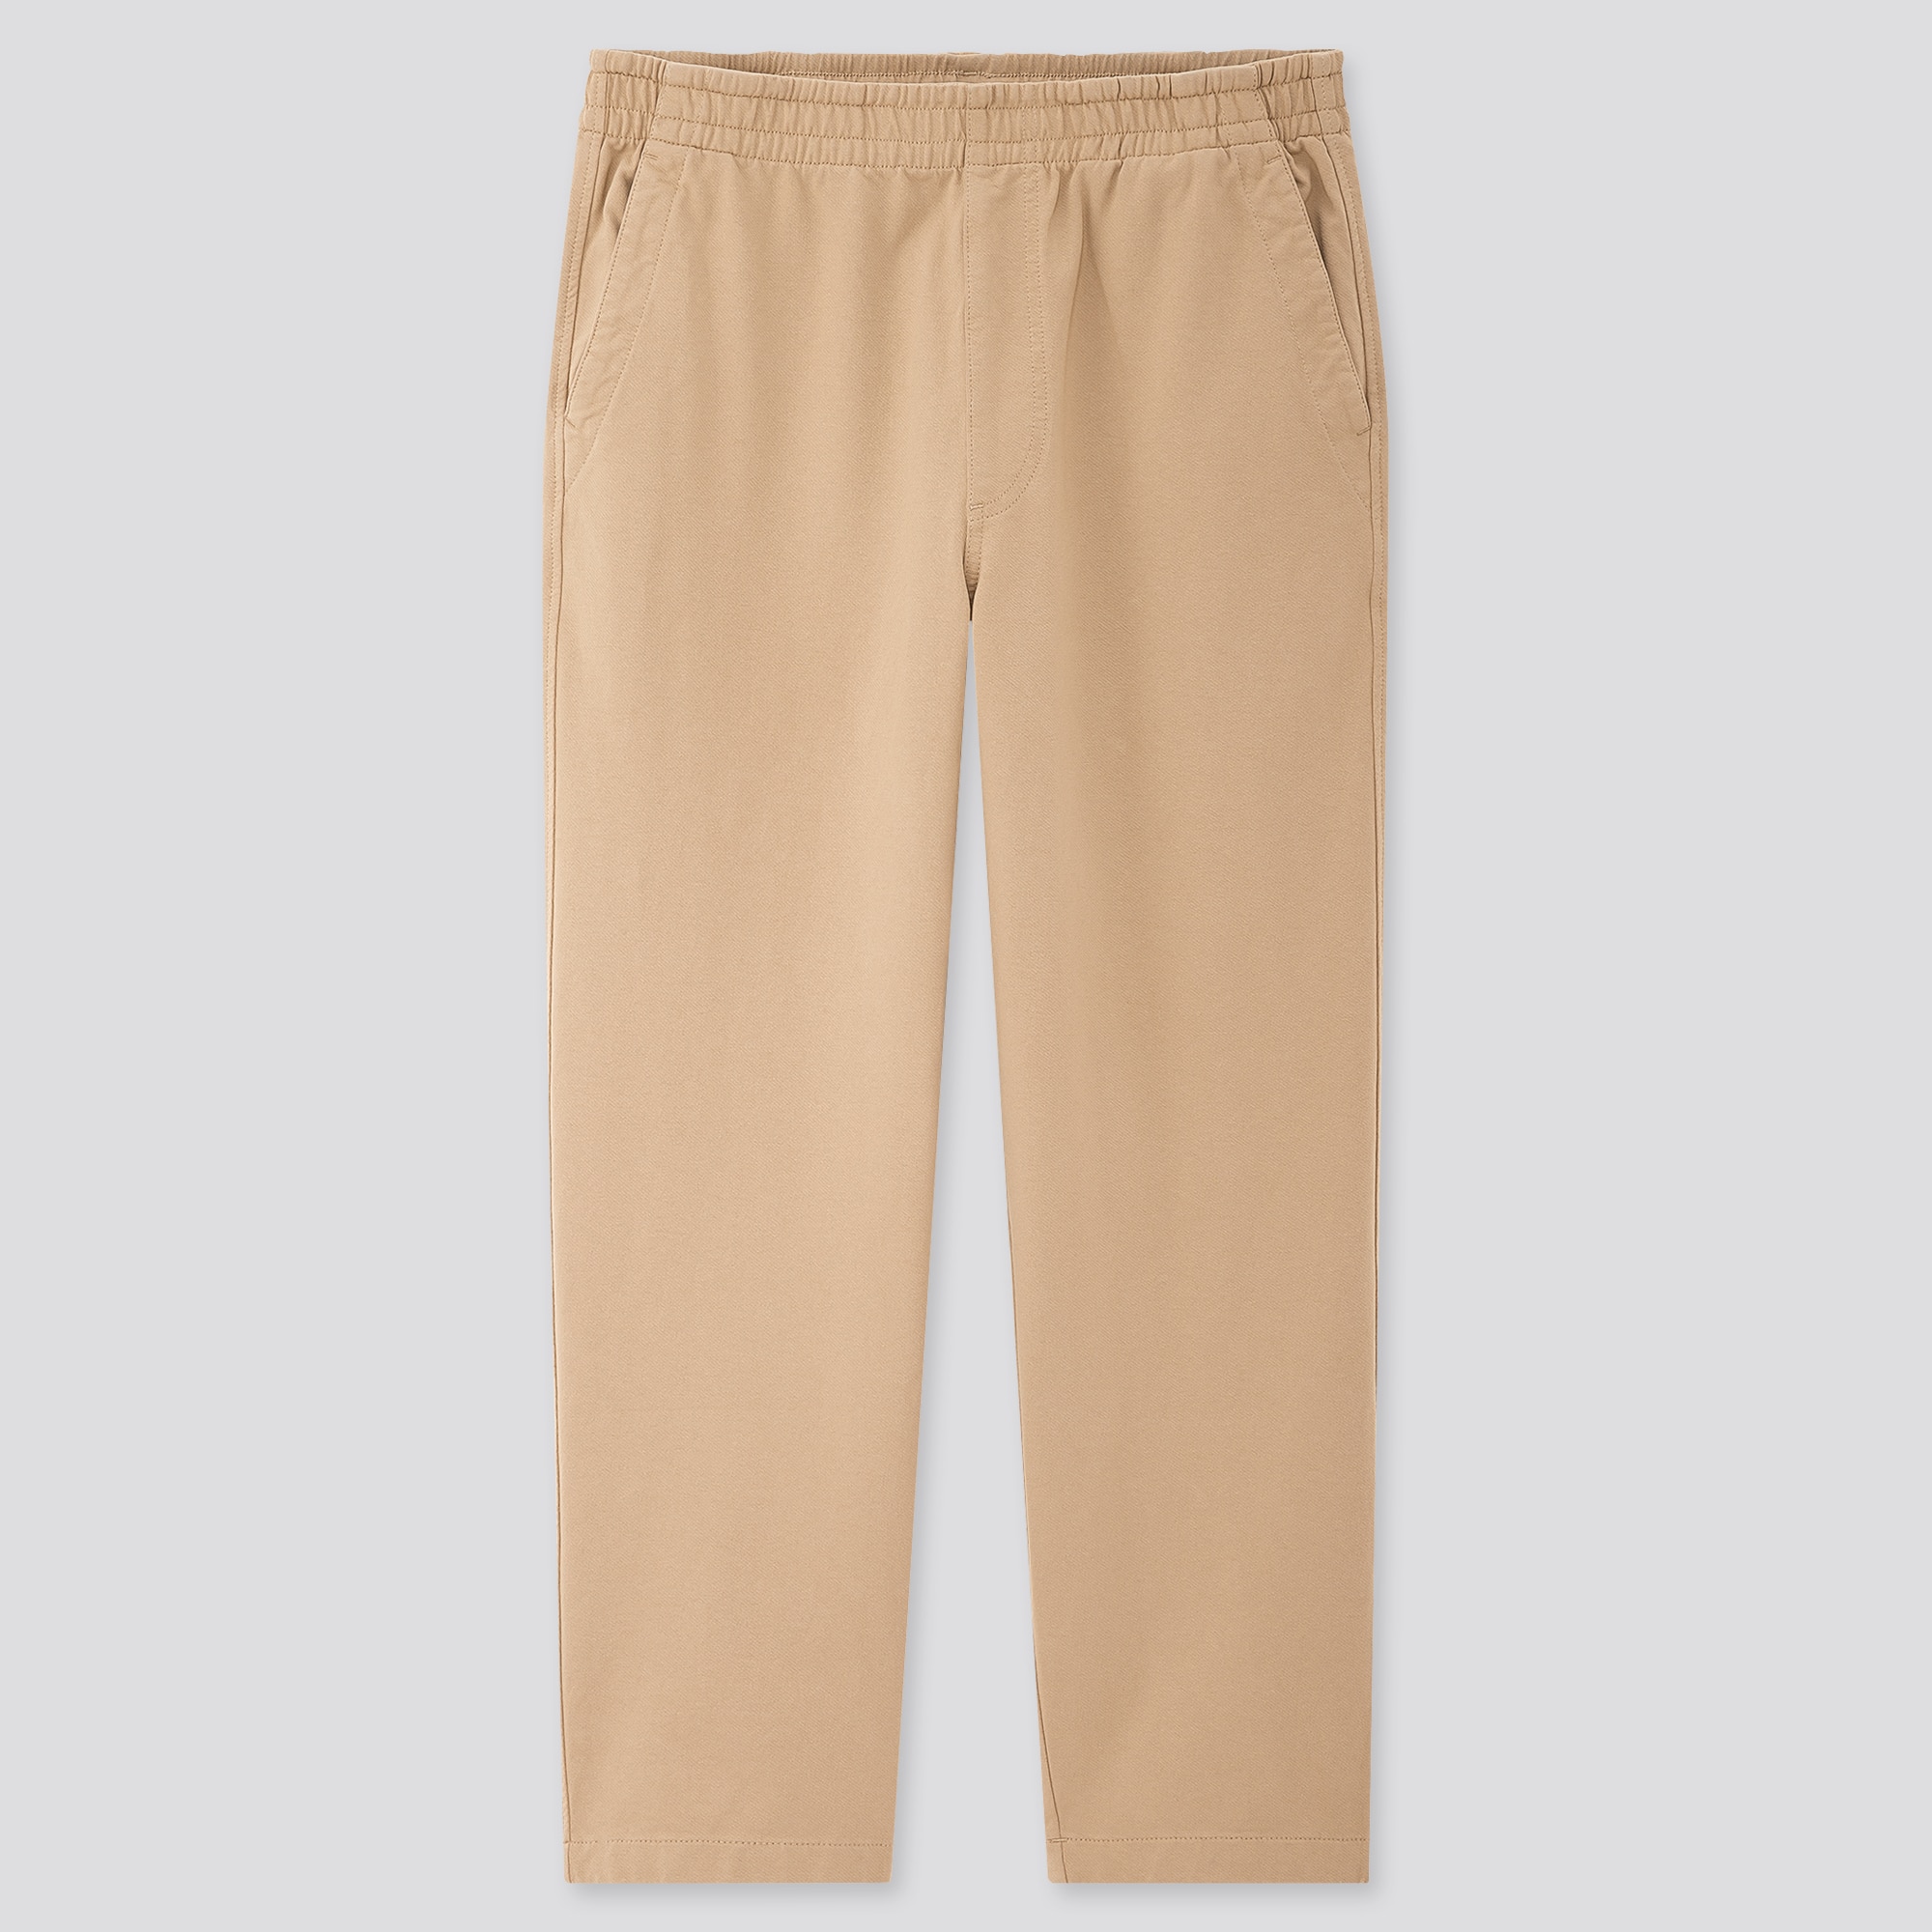 MEN WASHED JERSEY ANKLE-LENGTH PANTS 